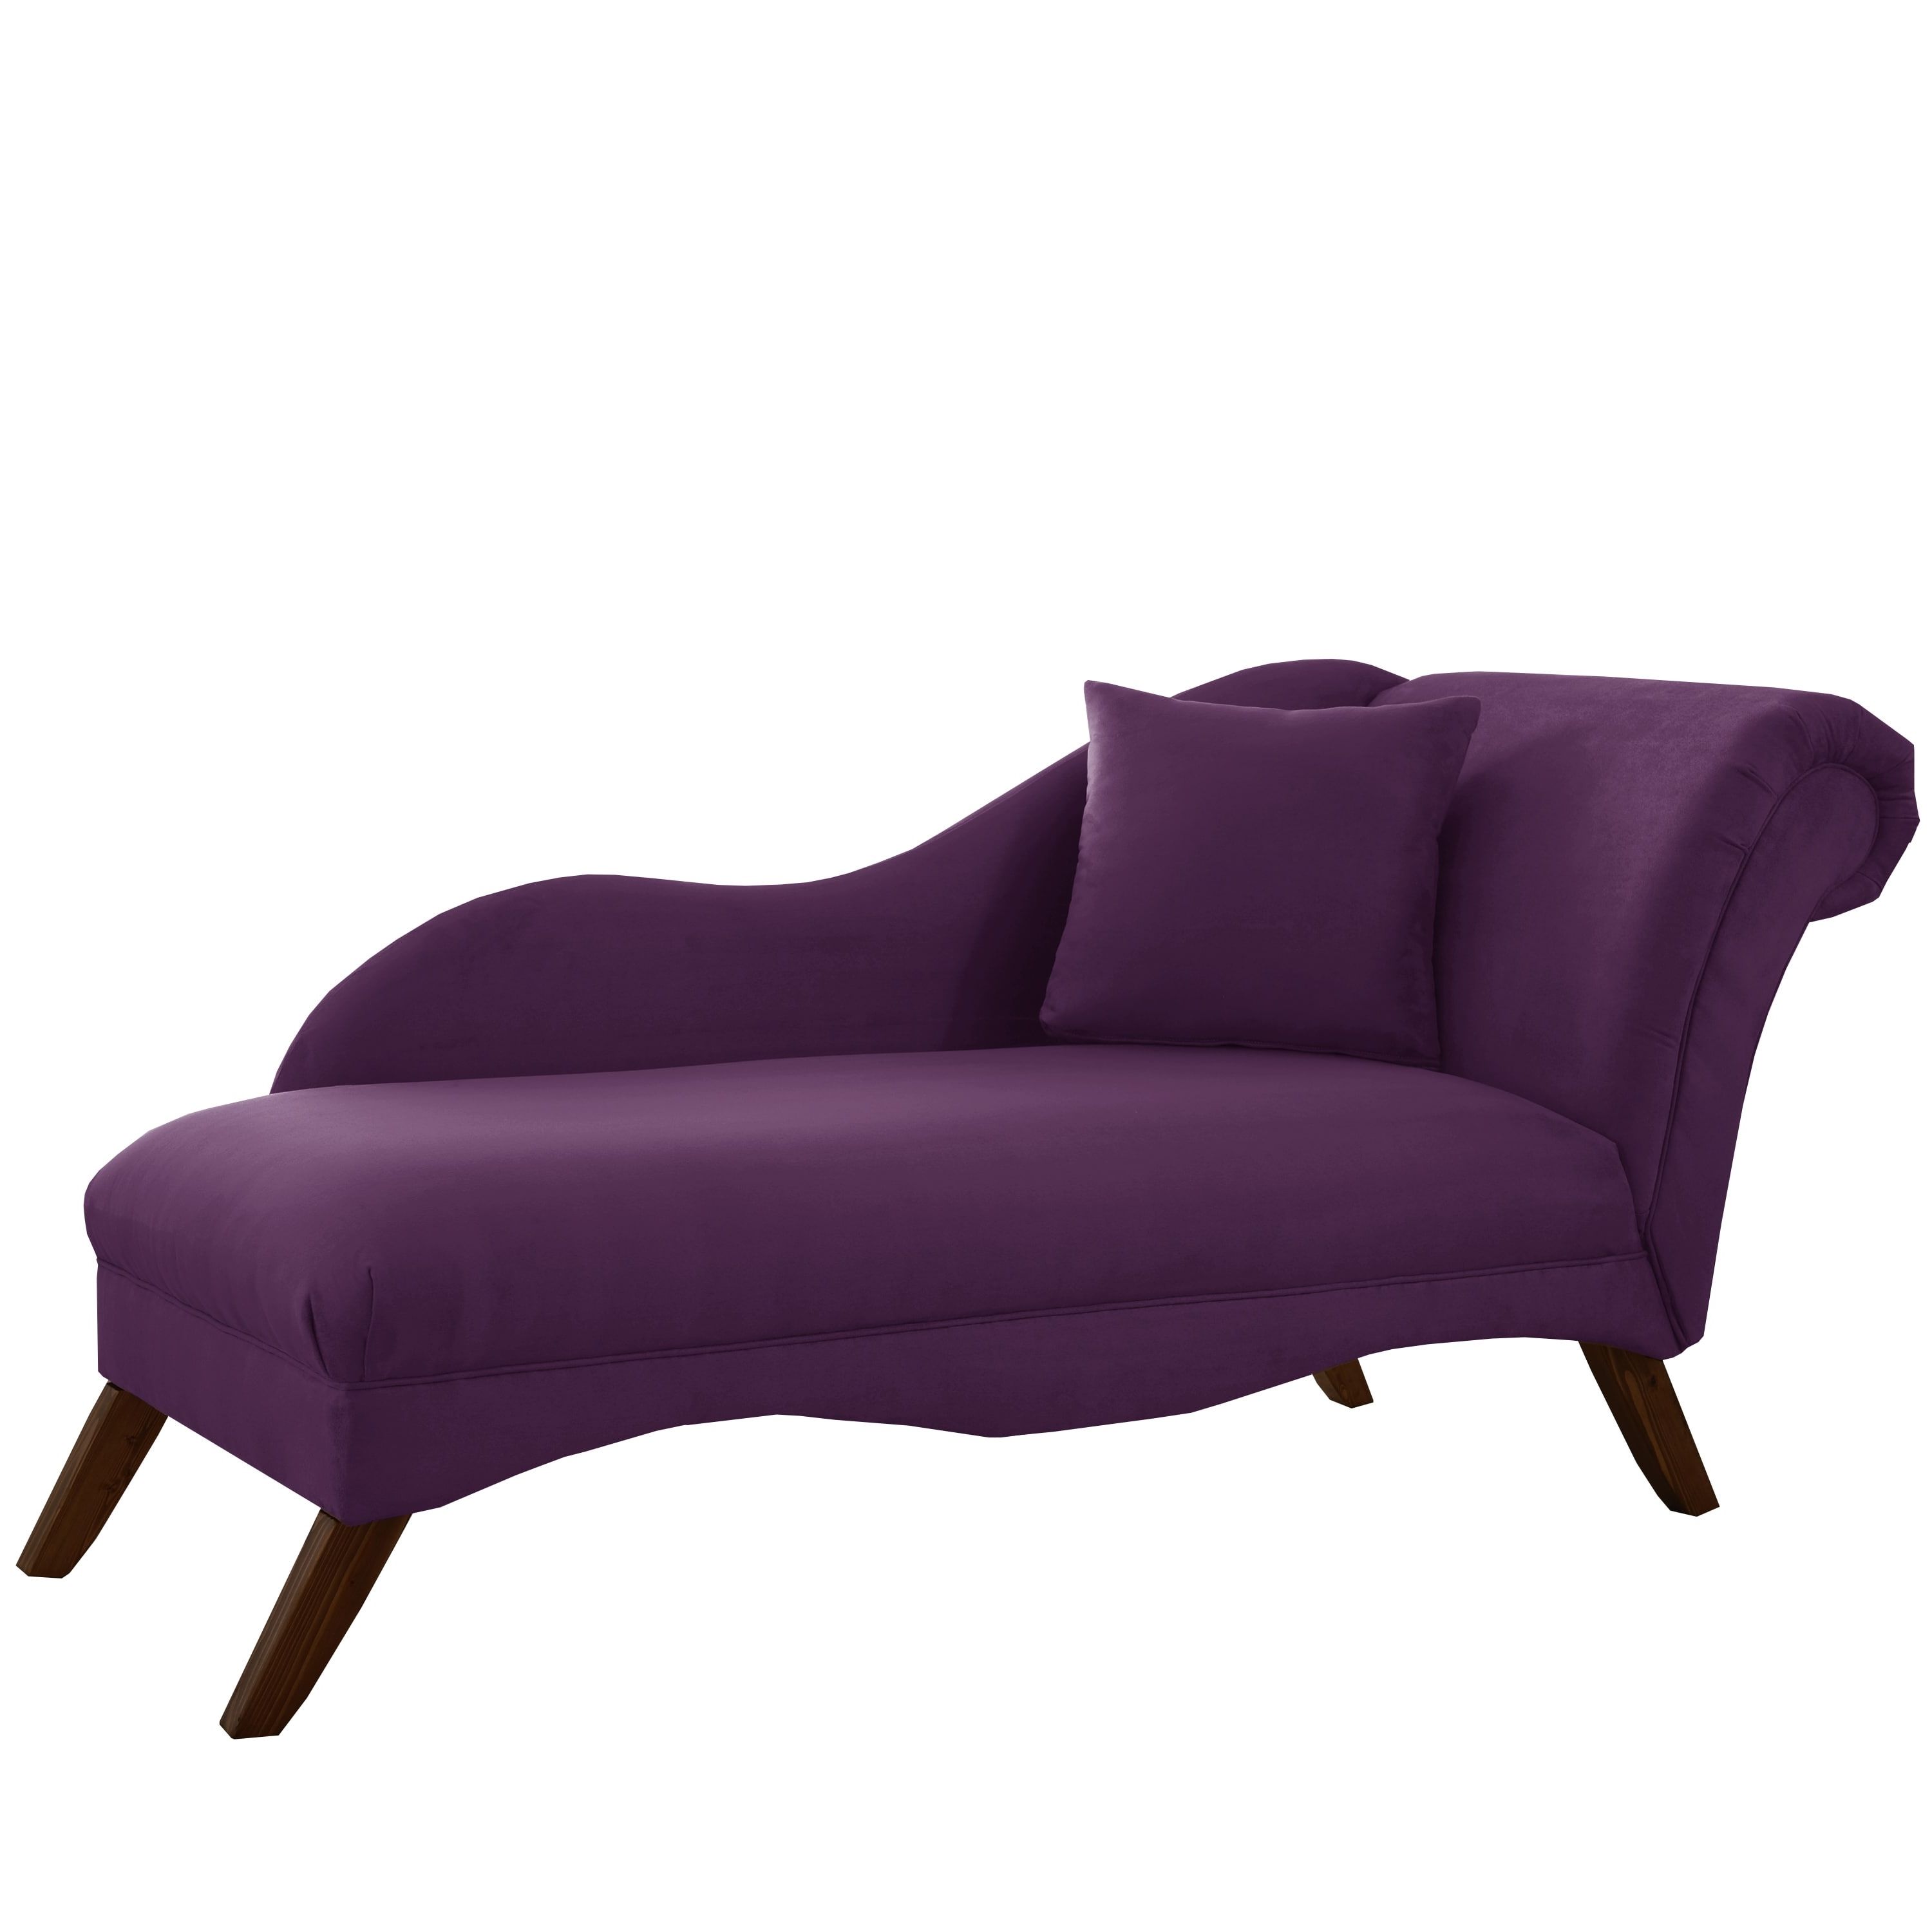 Most Popular Skyline Chaise Lounges Pertaining To Skyline Furniture Chaise Lounge In Velvet Aubergine – Free (View 9 of 15)